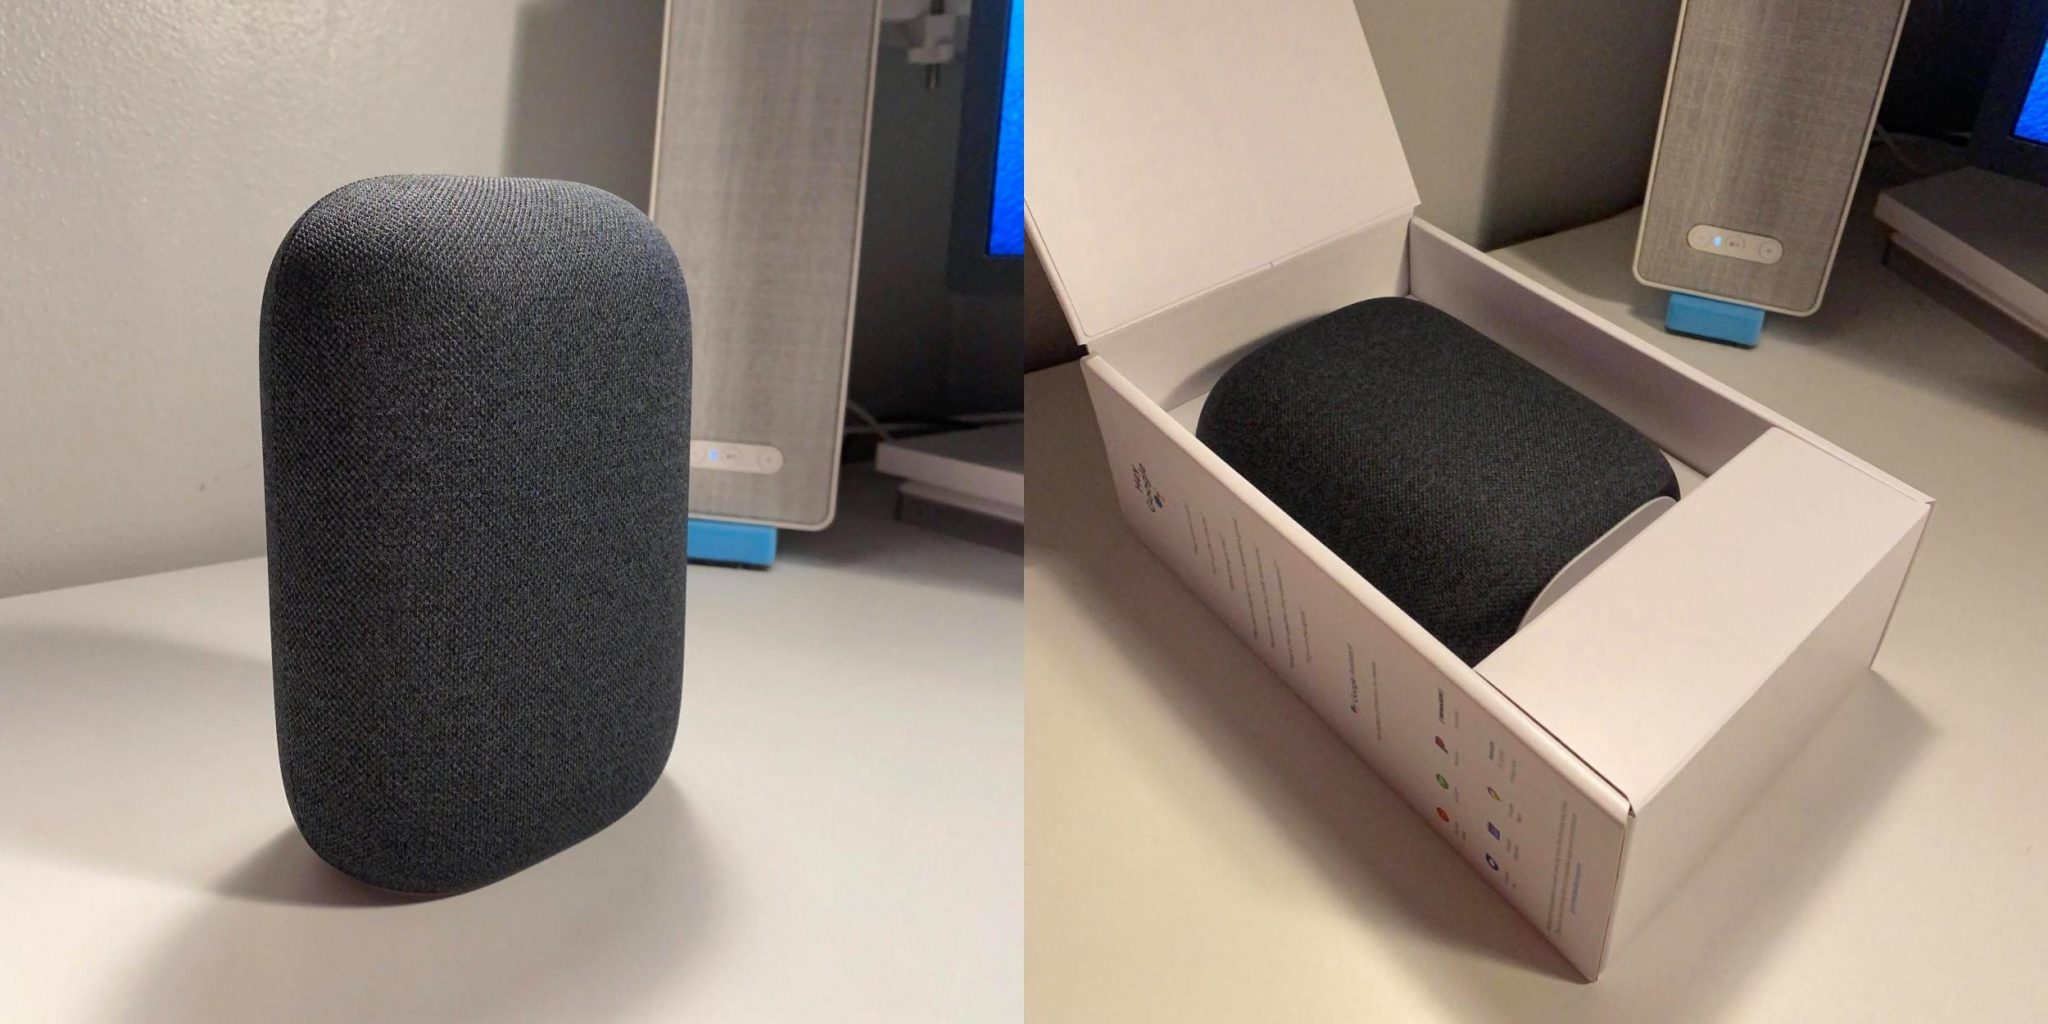 Nest Audio unboxing reveals where the touch controls are located [Gallery]